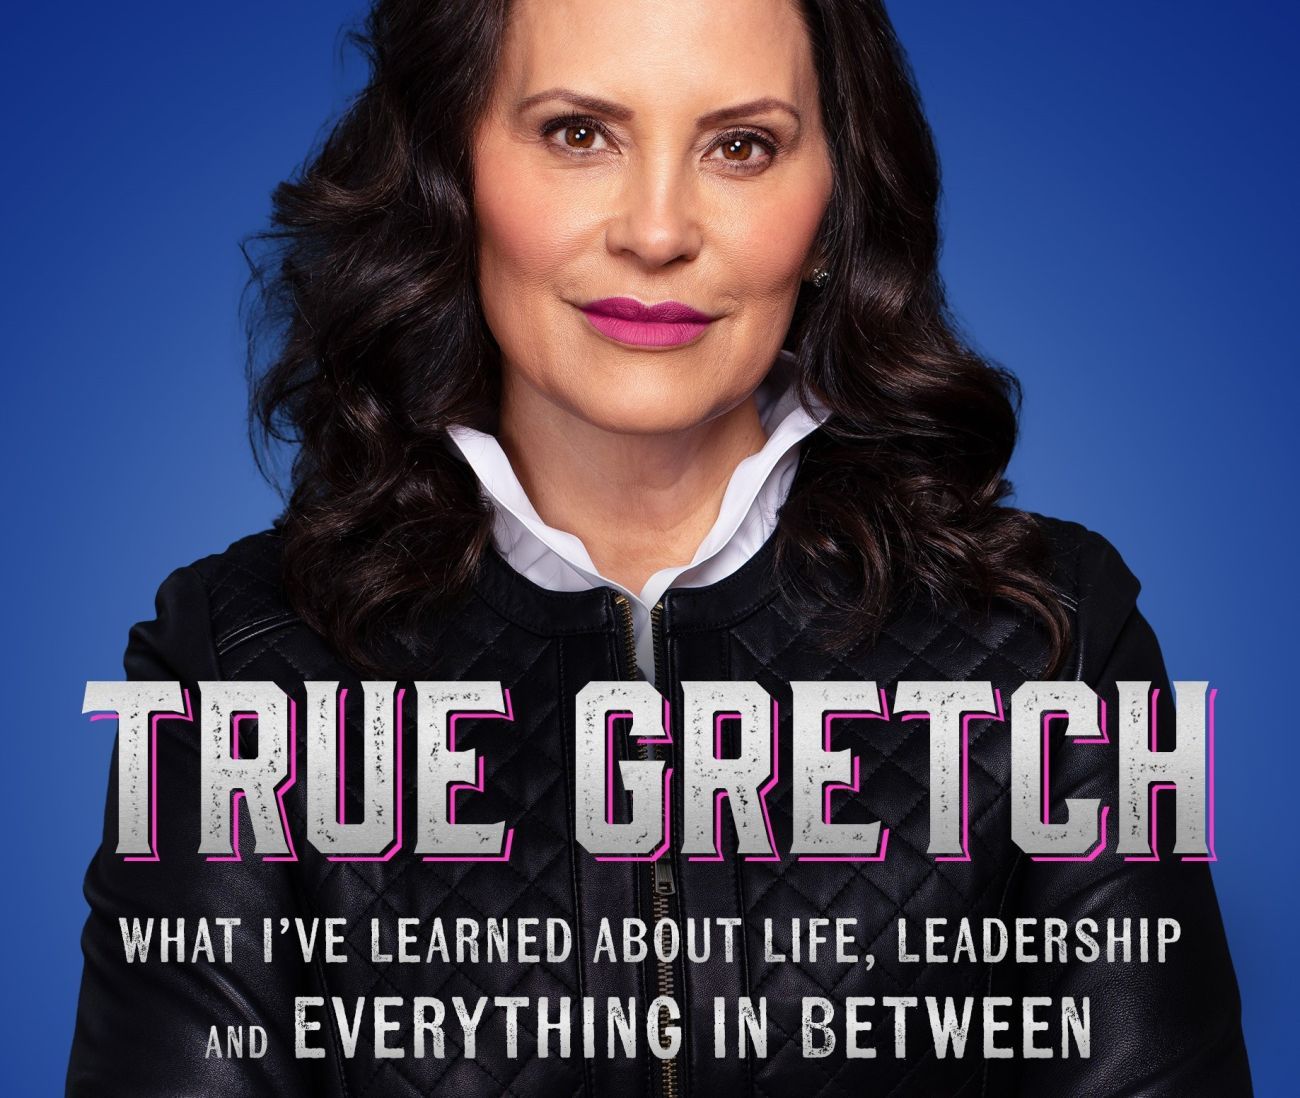 Gov. Gretchen Whitmer on a blue cover of a book called "True Gretch"